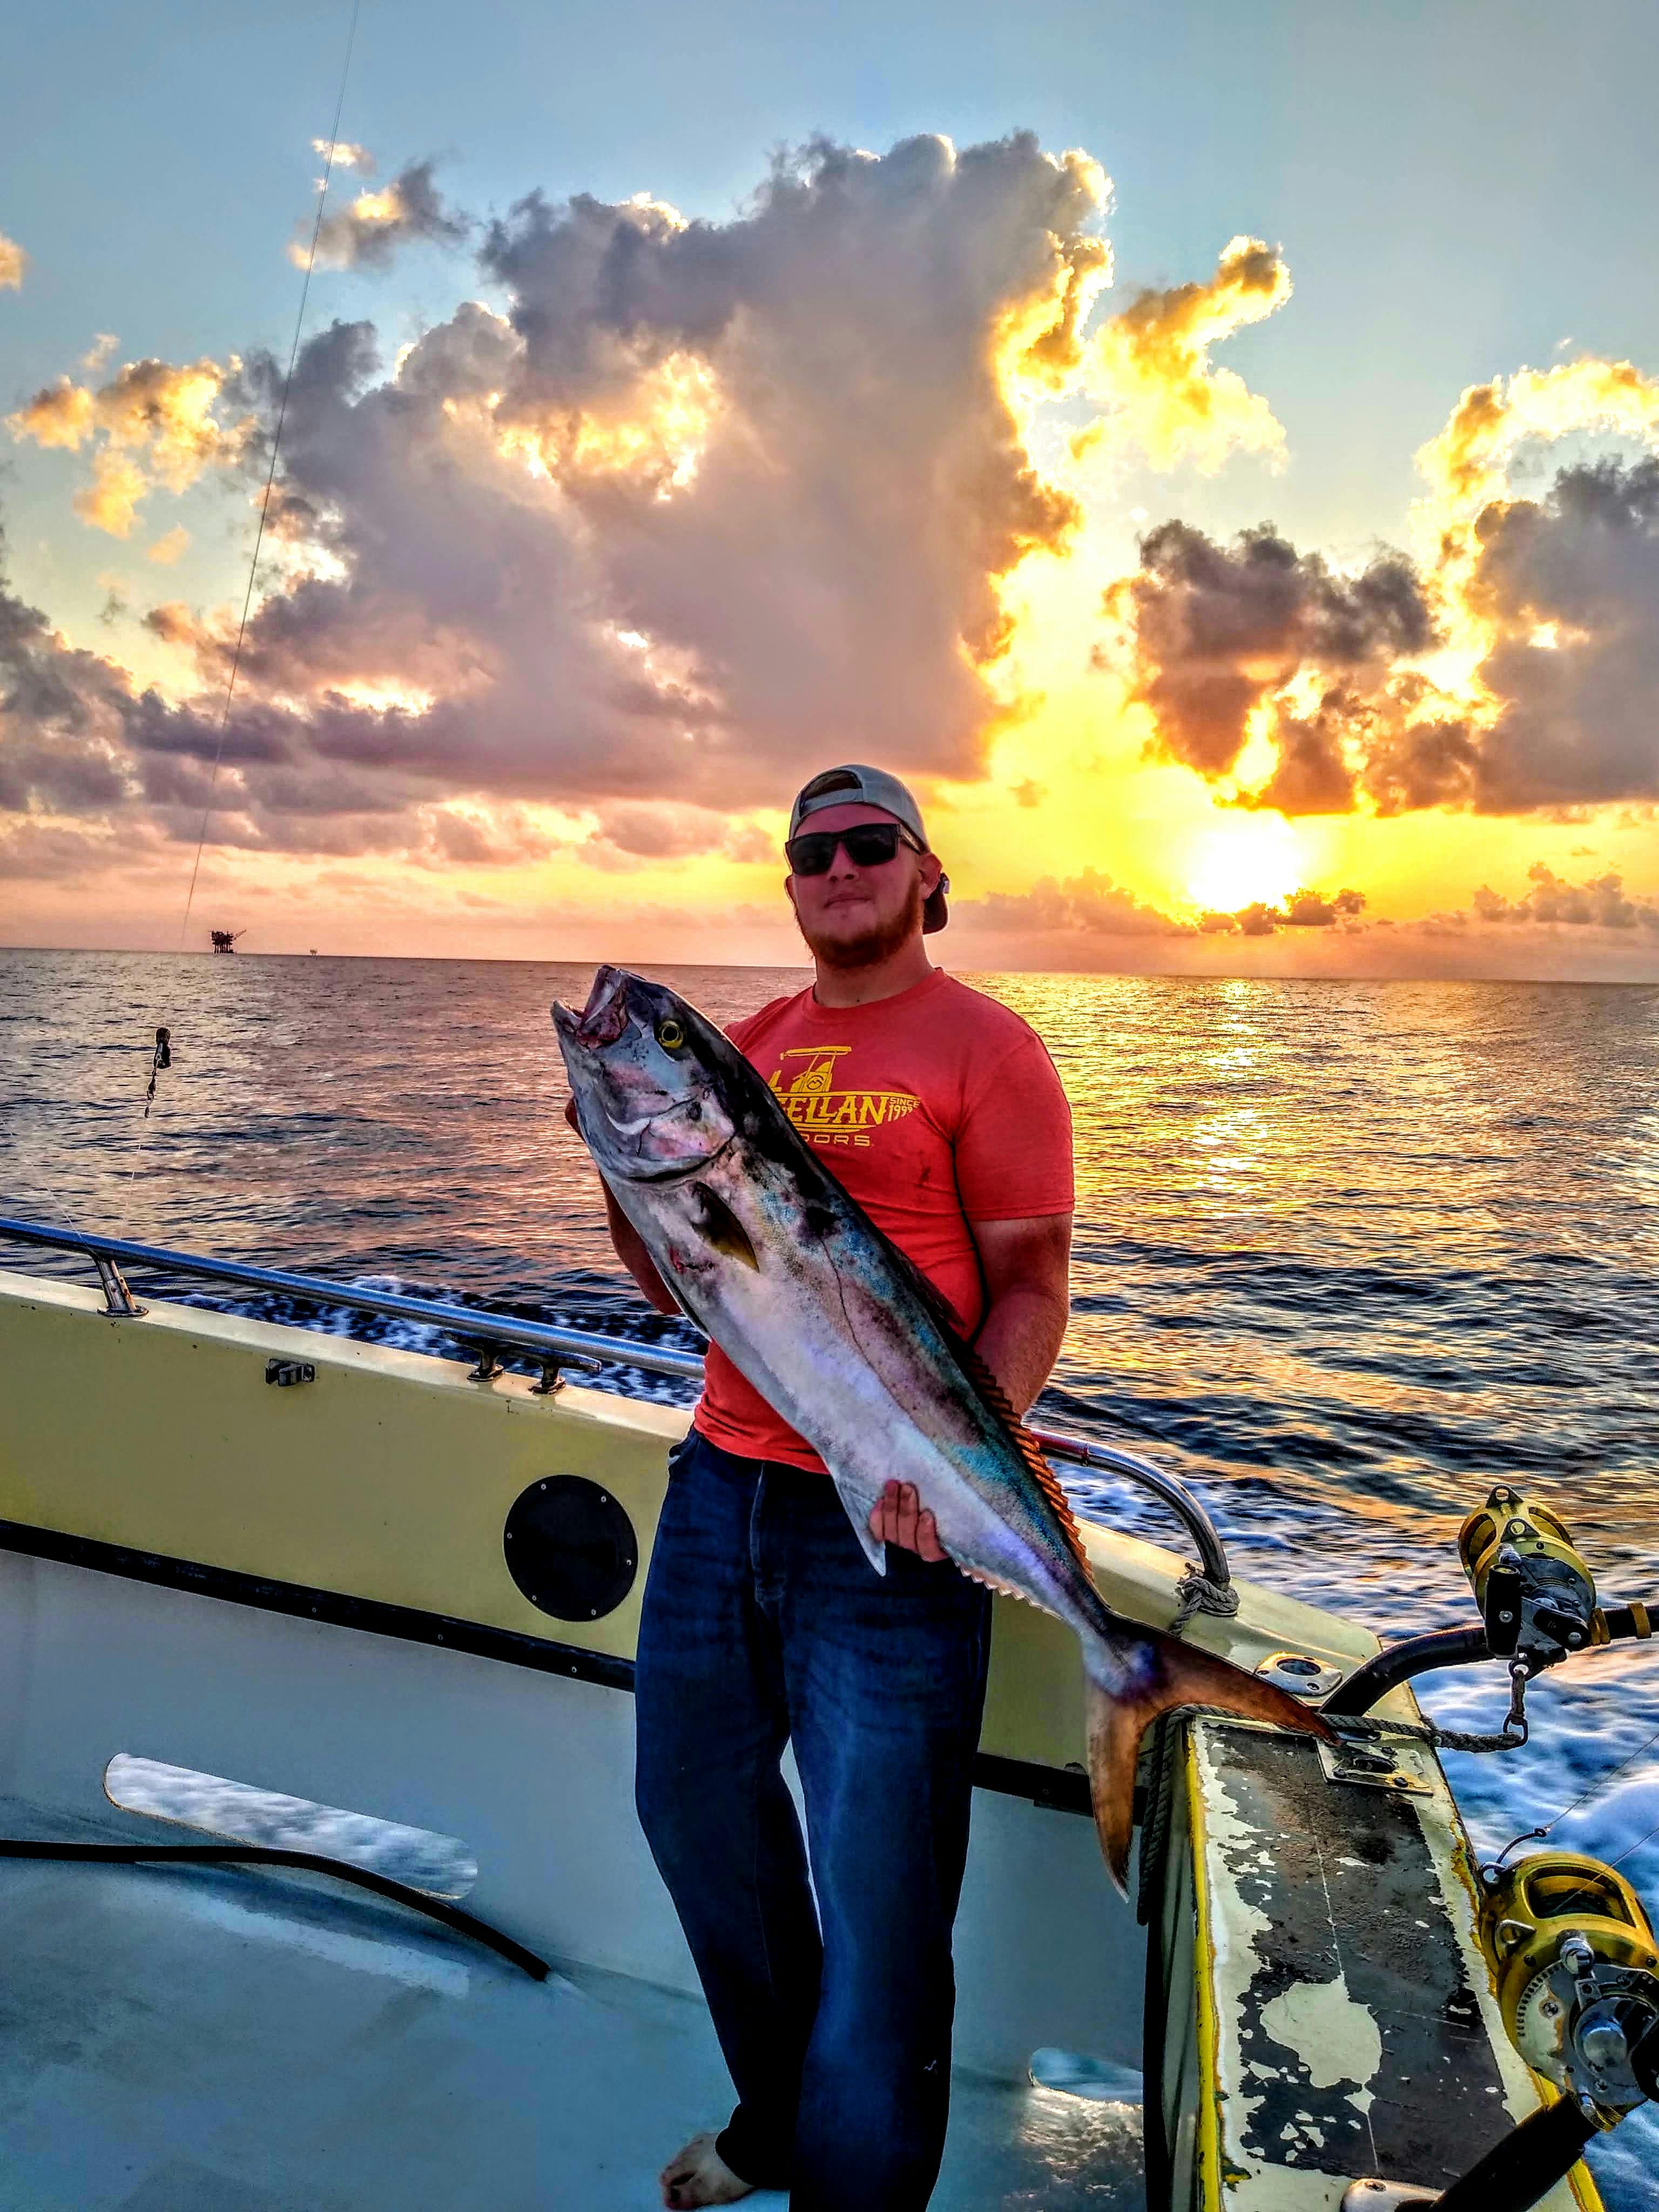 The author stands on a boat on open water, holding a very large fish and posing in front of a brilliant sunset. 